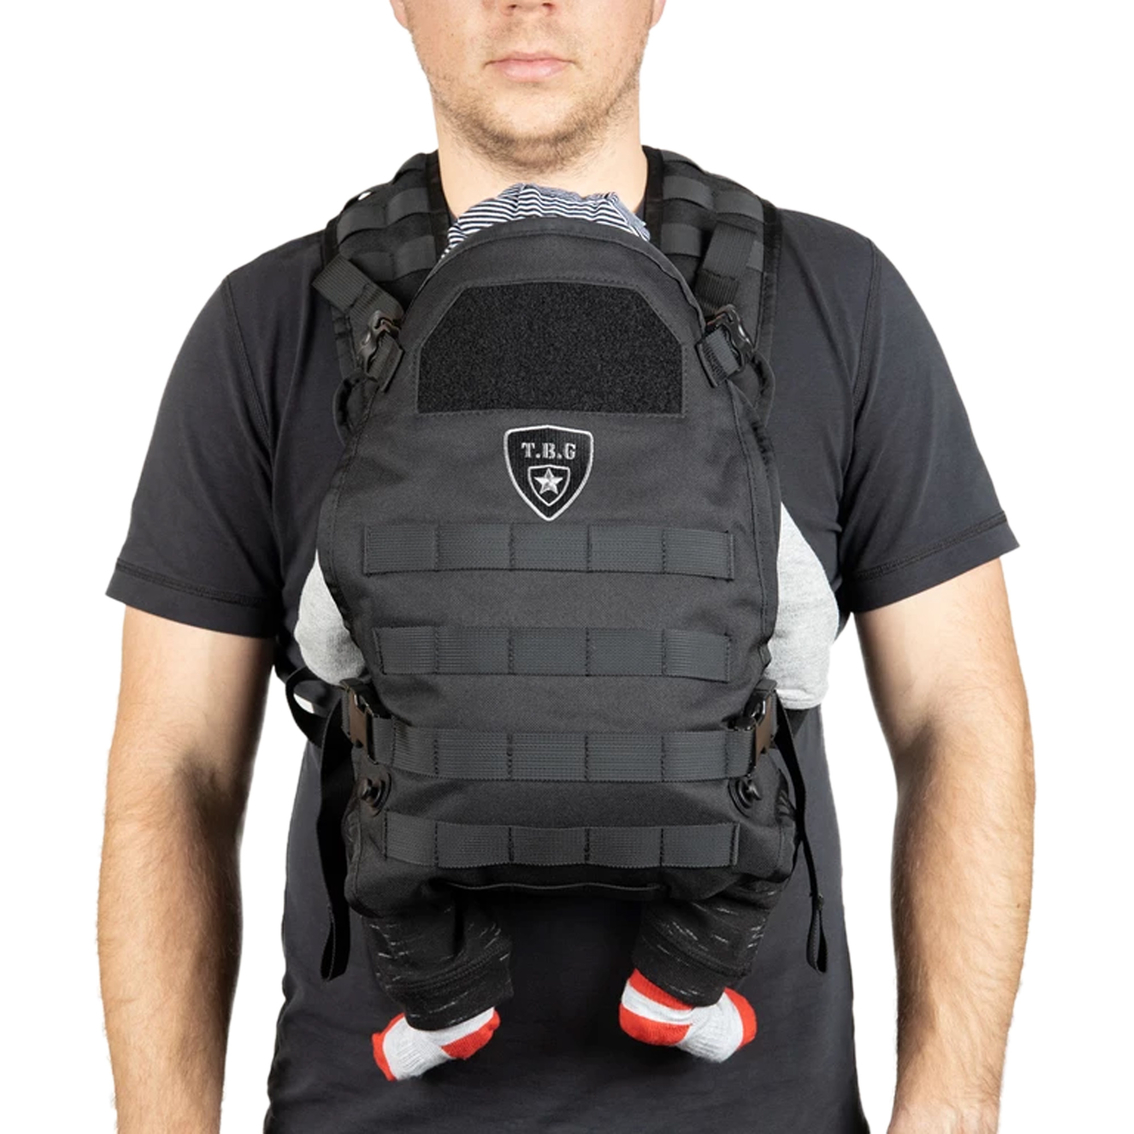 molle baby carrier